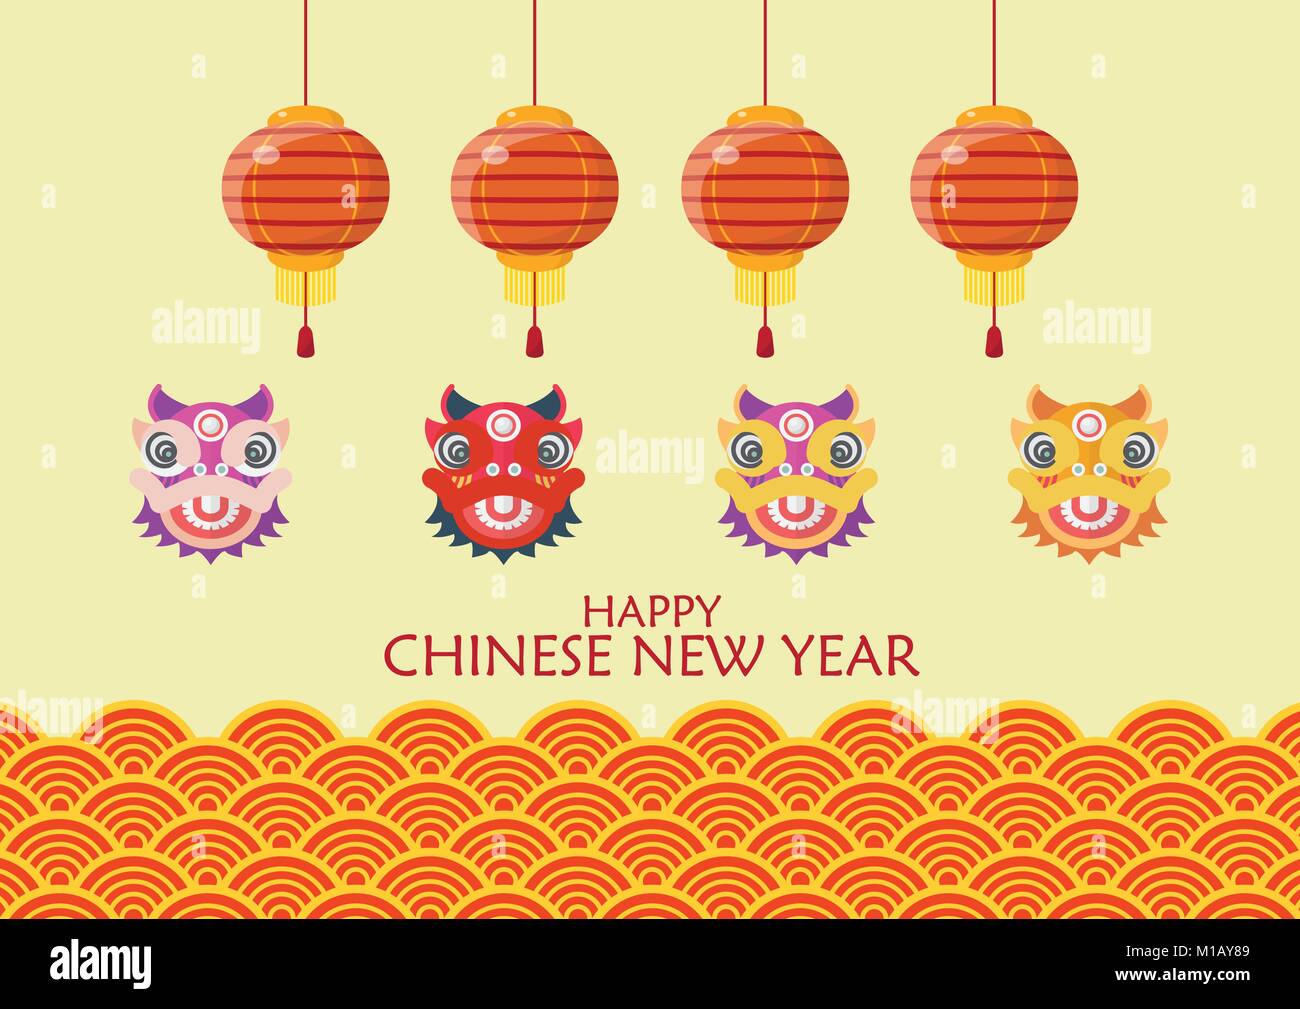 Happy chinese new year with Dancing lions and lanterns. Traditional wave background. Vector illustration Stock Vector